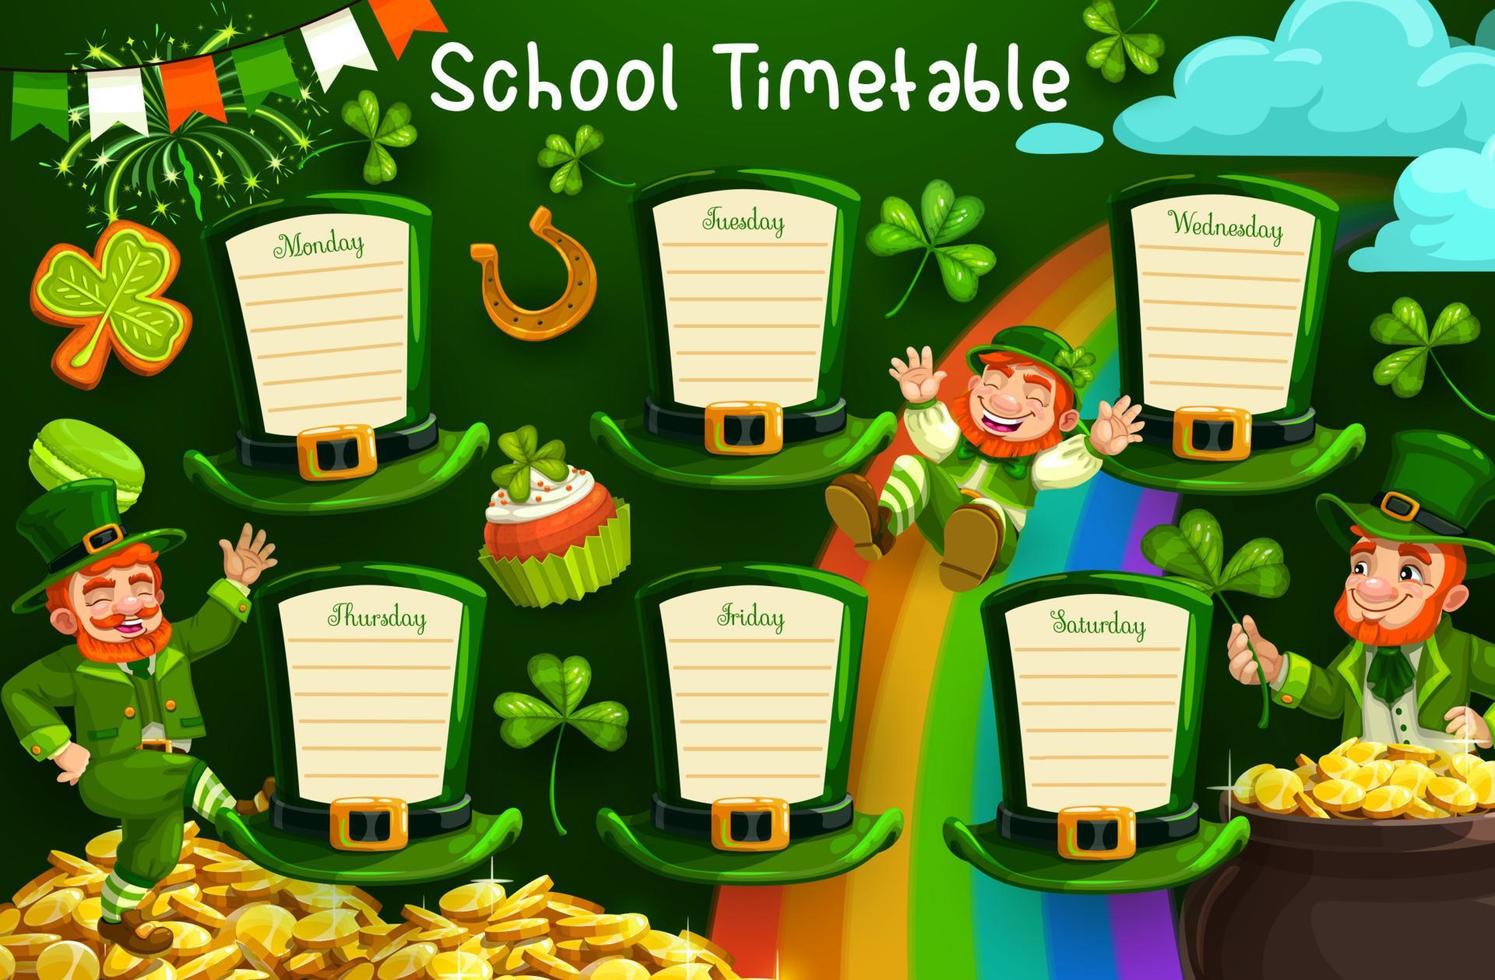 School timetable or schedule on St Patrick hats vector